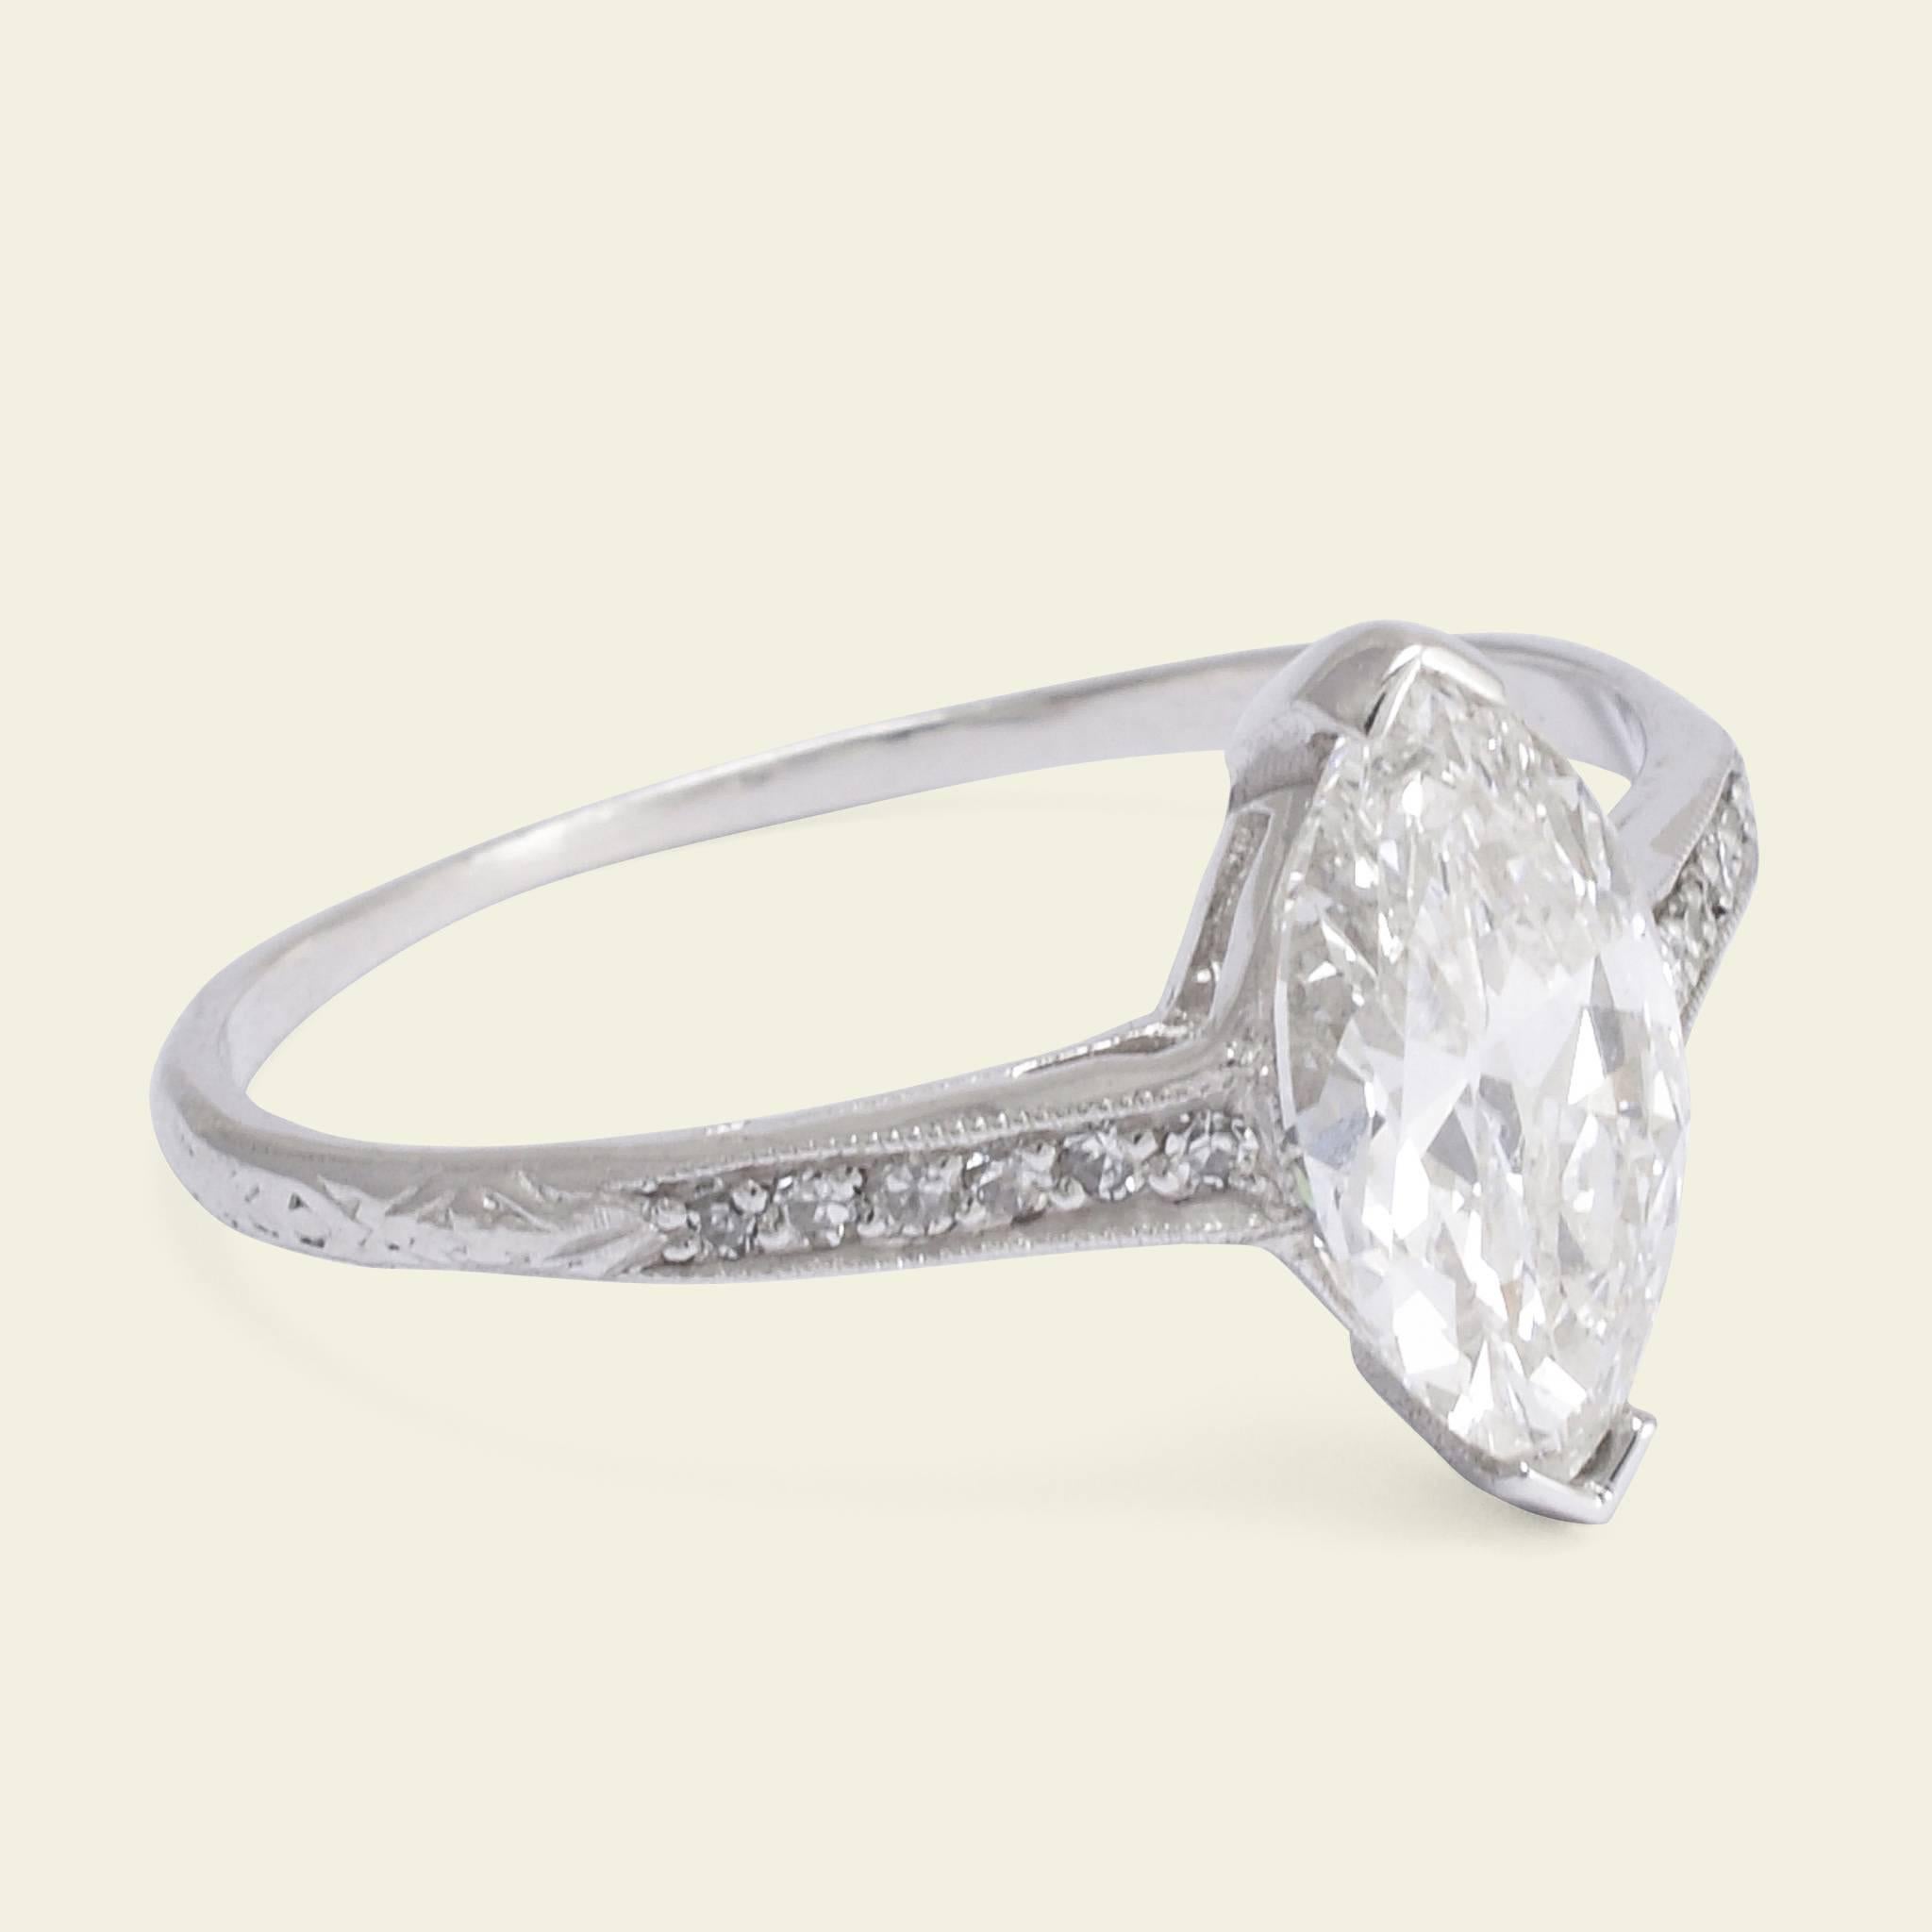 This nontraditional take on a classic engagement ring style dates to the 1930s. Made in platinum, the center stone is a north to south oriented 1.03ct marquise brilliant cut diamond (E/VS1). The marquise cut was supposedly invented in 1745 at the